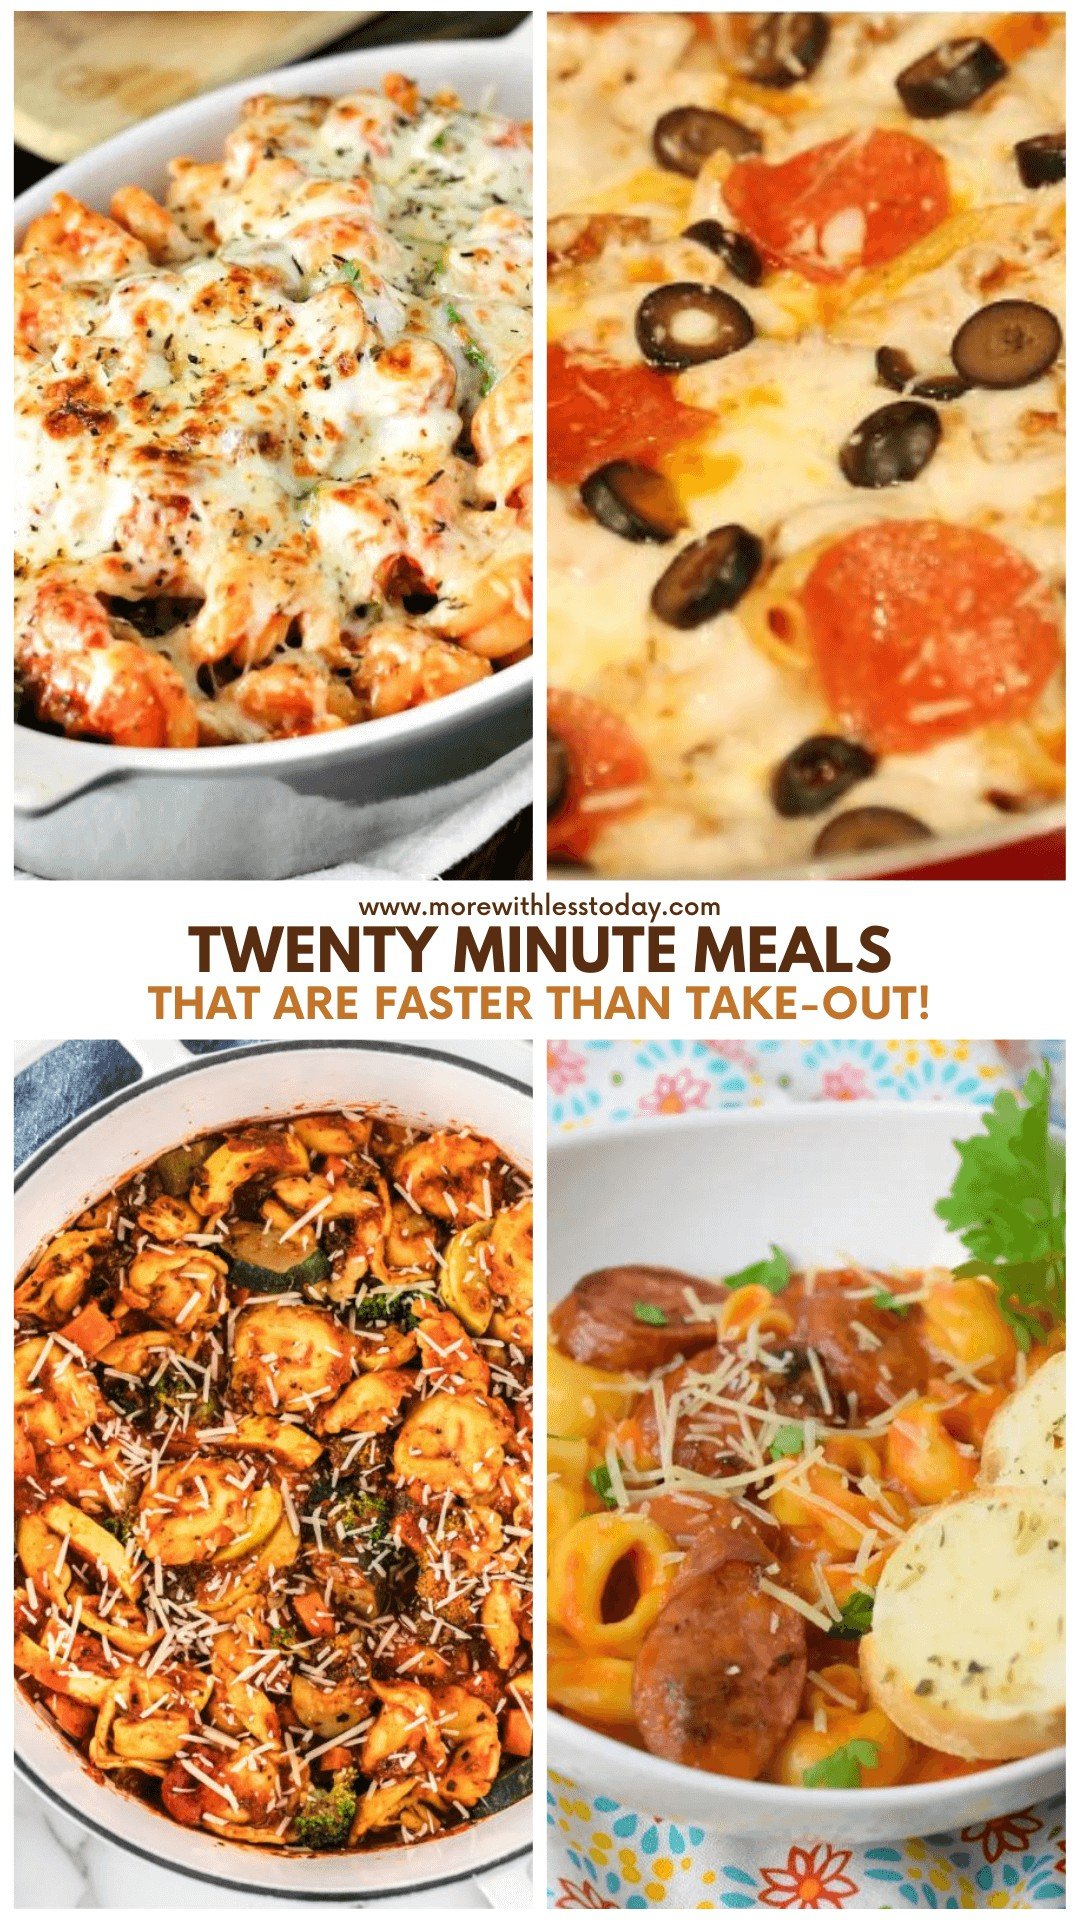 Twenty Minute Meals That Are Faster Than Take-Out - PIN